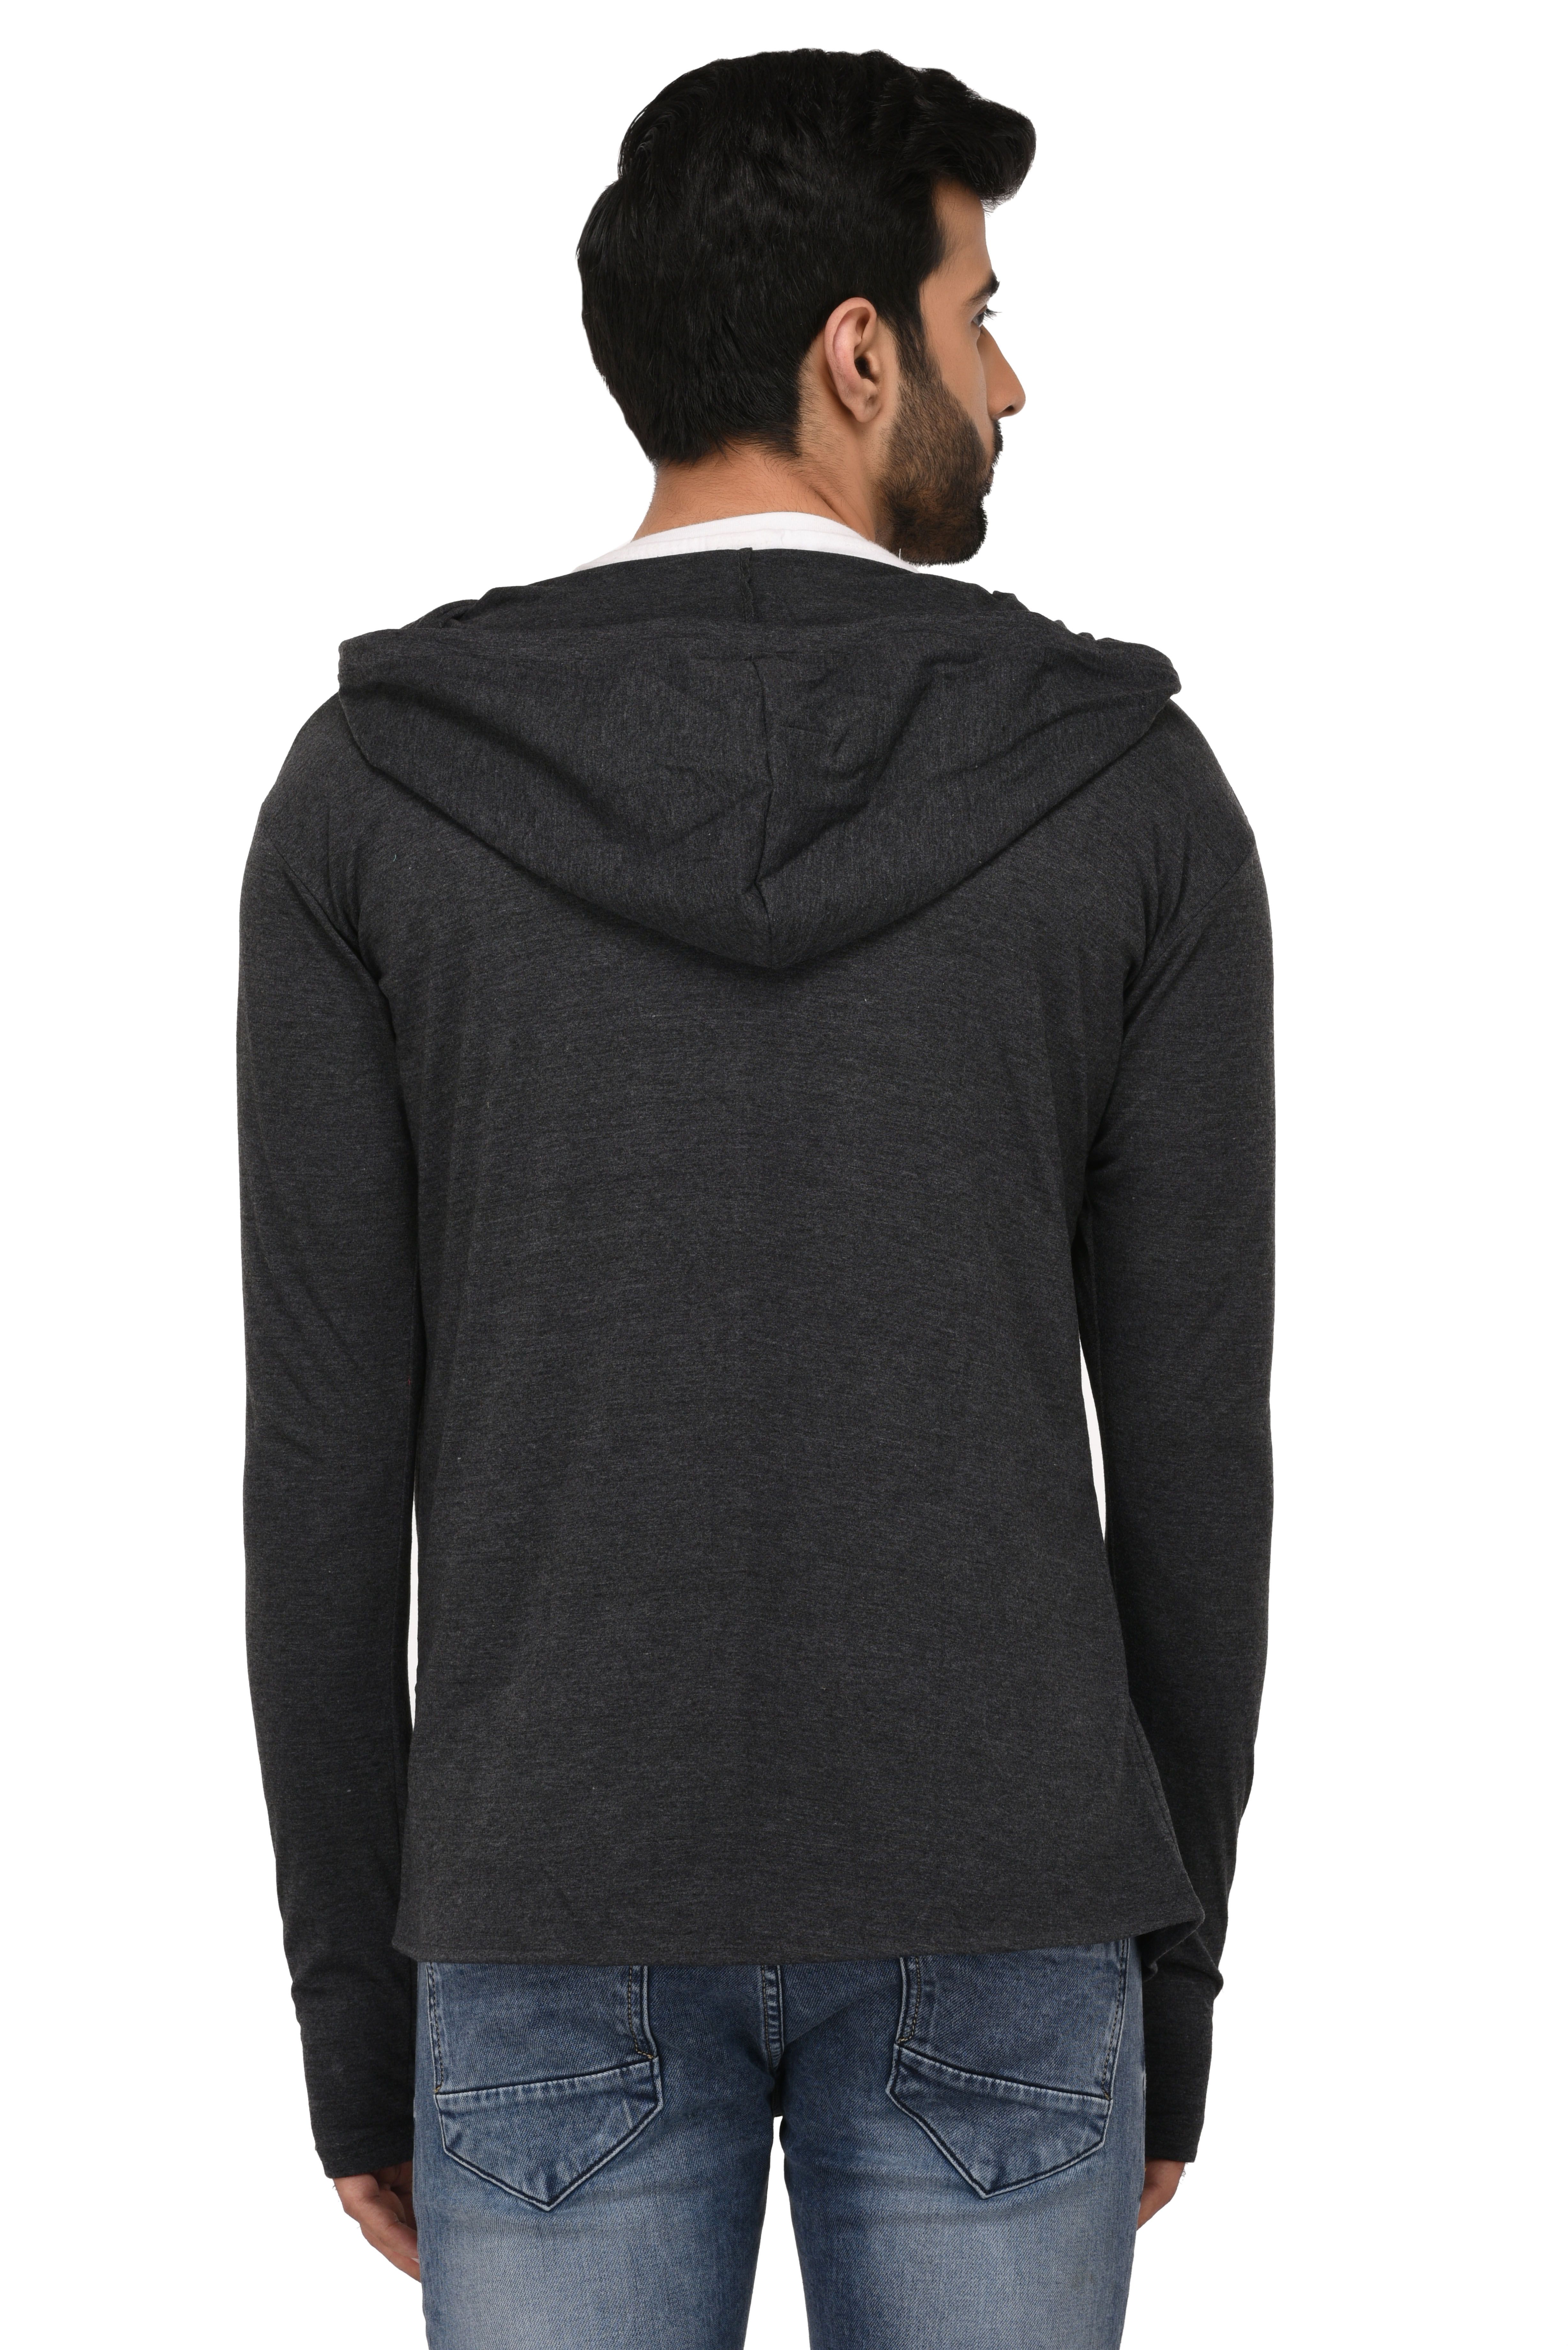 VILLAIN Grey Hooded Sweater - Buy VILLAIN Grey Hooded Sweater Online at ...